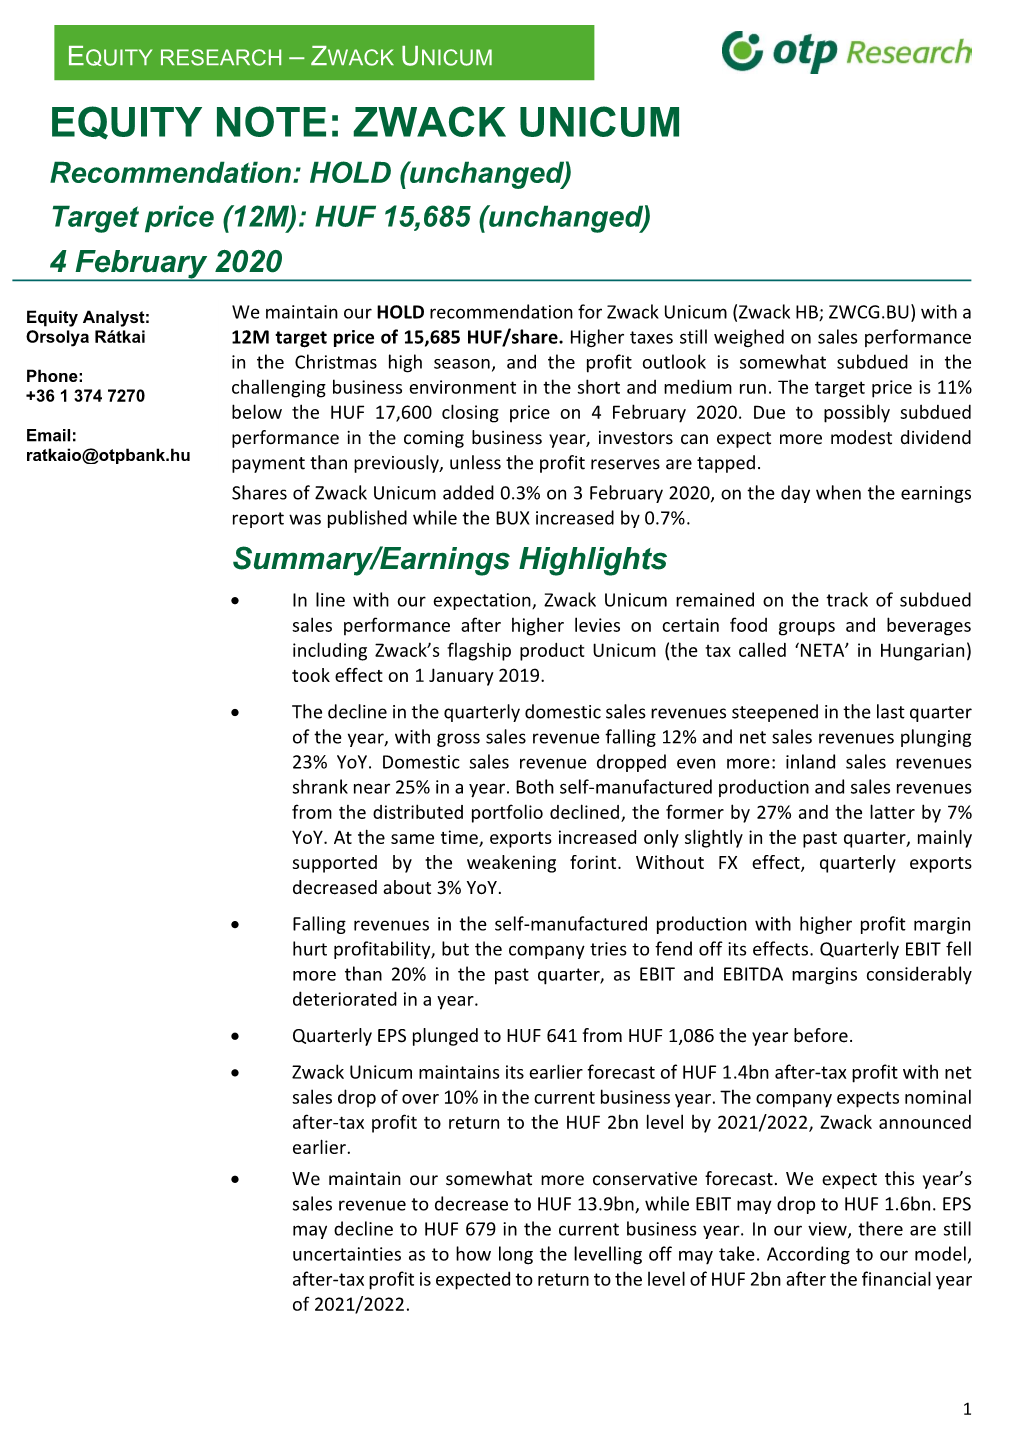 EQUITY NOTE: ZWACK UNICUM Recommendation: HOLD (Unchanged) Target Price (12M): HUF 15,685 (Unchanged) 4 February 2020